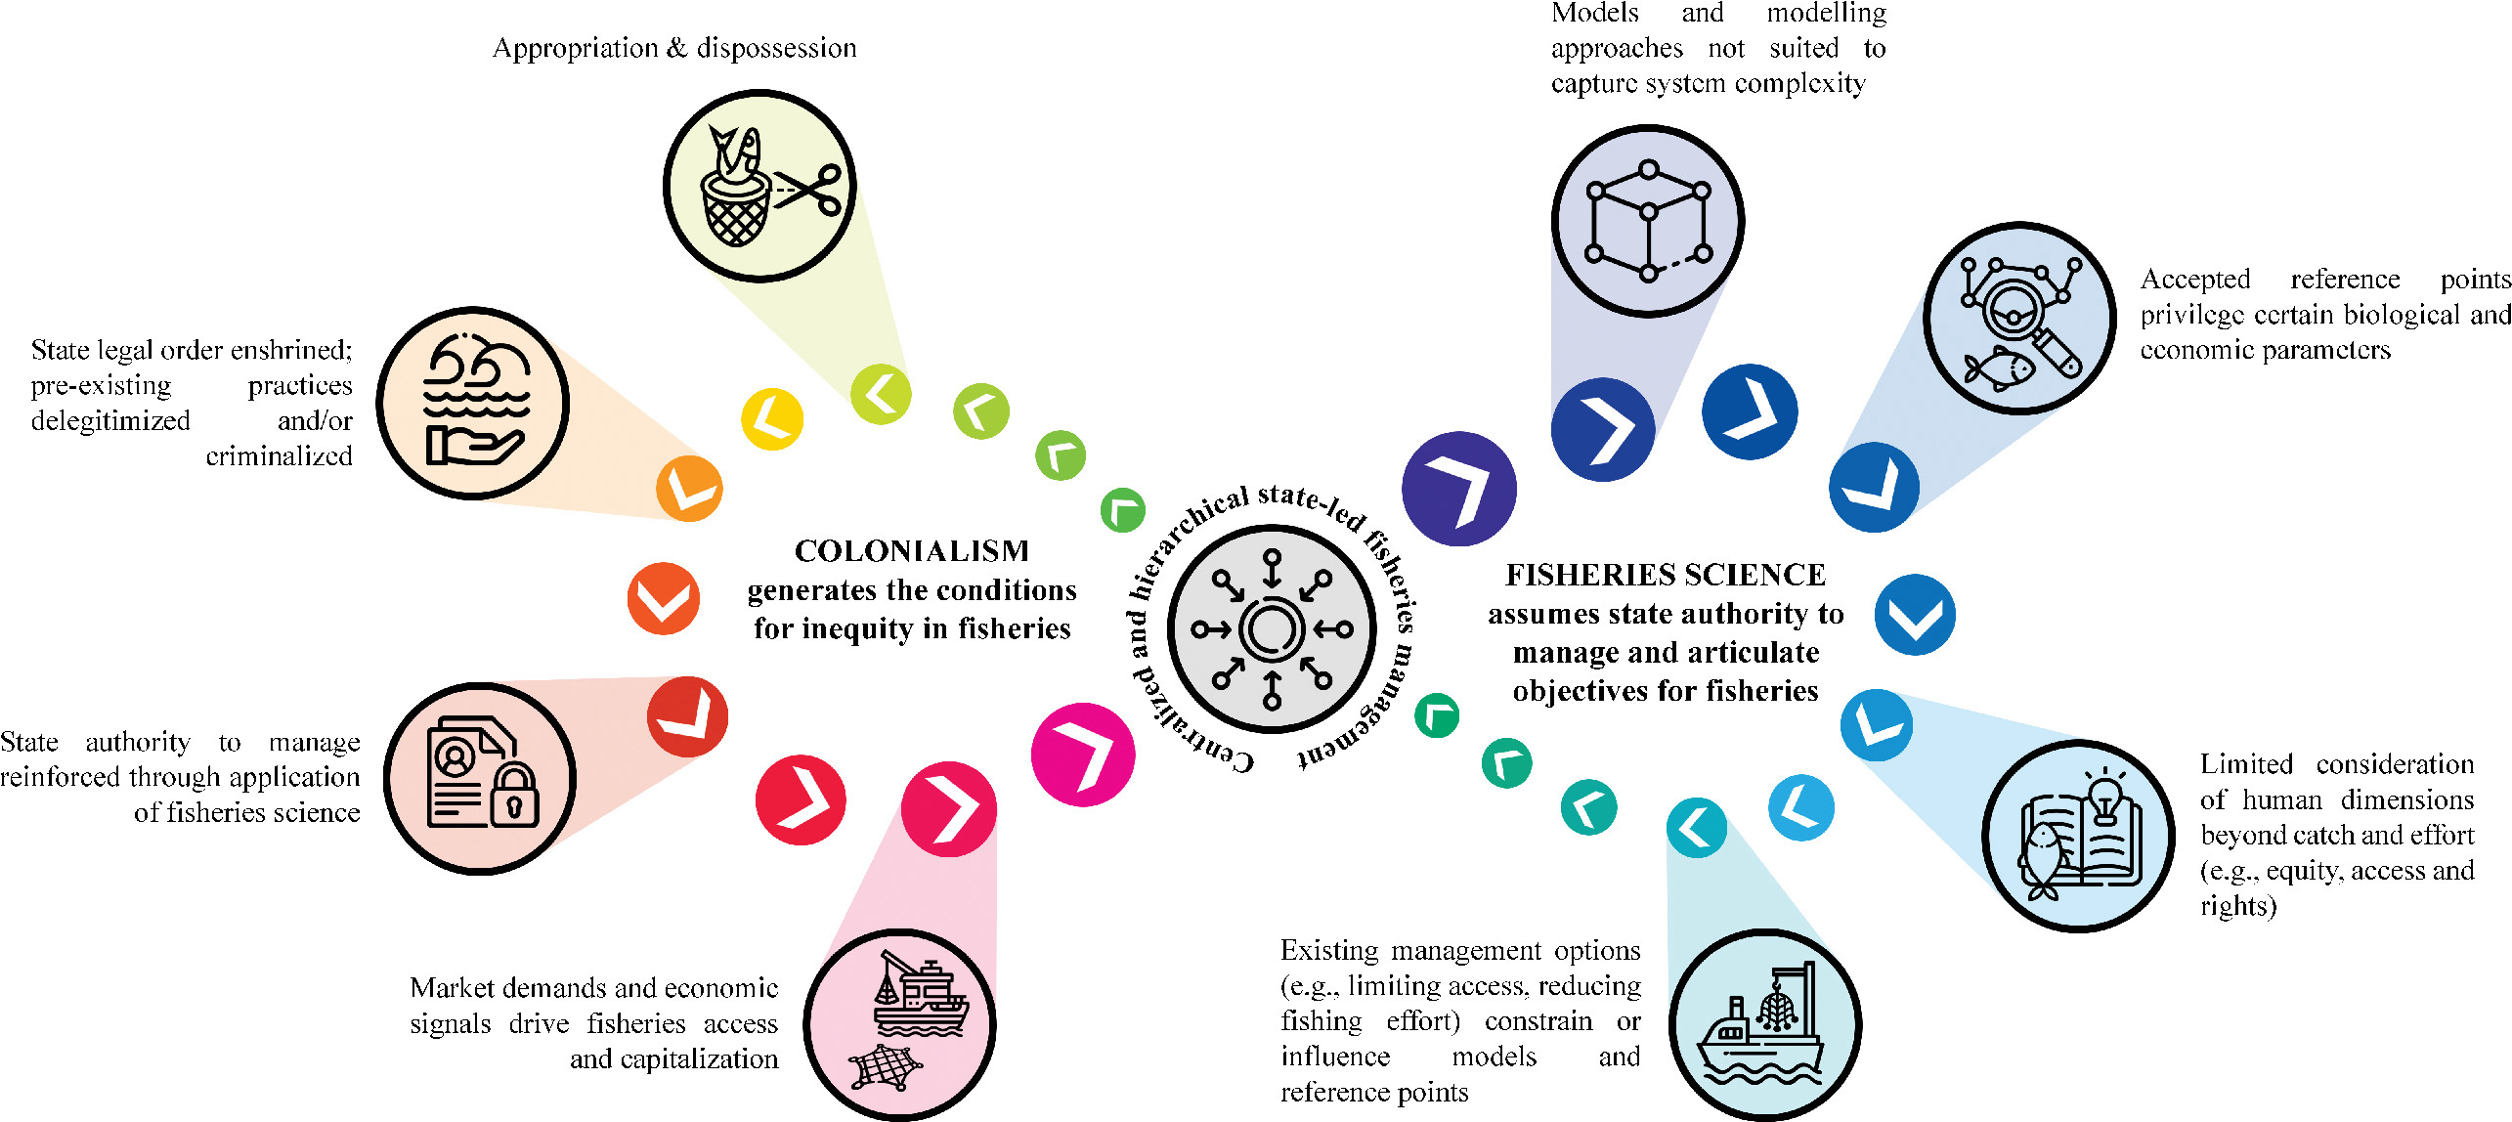 A circular infographic that illustrates the relationship between colonialism and fisheries science. It is divided into two main sections: "Colonialism generates the conditions for inequity in fisheries" on the left and "Fisheries Science assumes state authority to manage and articulate objectives for fisheries" on the right. The left section, representing colonialism, includes the following elements arranged in a semicircle with icons and text: An icon of a hand holding fish with the text: "State legal order enshrined; pre-existing practices delegitimized and/or criminalized." An icon of a document with a lock and the text: "State authority to manage reinforced through application of fisheries science." An icon of a fishing boat with the text: "Market demands and economic signals drive fisheries access and capitalization." An icon of a fish inside a net with scissors cutting inside, with the text: "Appropriation and dispossession" The right section, representing fisheries science, includes the following elements also arranged in a semicircle with icons and text: An icon of a cube with connected dots and the text: "Models and modelling approaches not suited to capture system complexity." An icon of a magnifying glass over a fish and the text: "Accepted reference points privilege certain biological and economic parameters." An icon of a fishing vessel with the text: "Existing management options (e.g., limiting access, reducing fishing effort) constrain or influence models and reference points." An icon of a book with a light bulb and the text: "Limited consideration of human dimensions beyond catch and effort (e.g., equity, access, and rights)." In the center, there is a text box stating: "Centralized and hierarchical state-led fisheries management." The arrows between the icons indicate a flow or connection between the different concepts, highlighting how colonialism and state authority influence fisheries science and management practices.